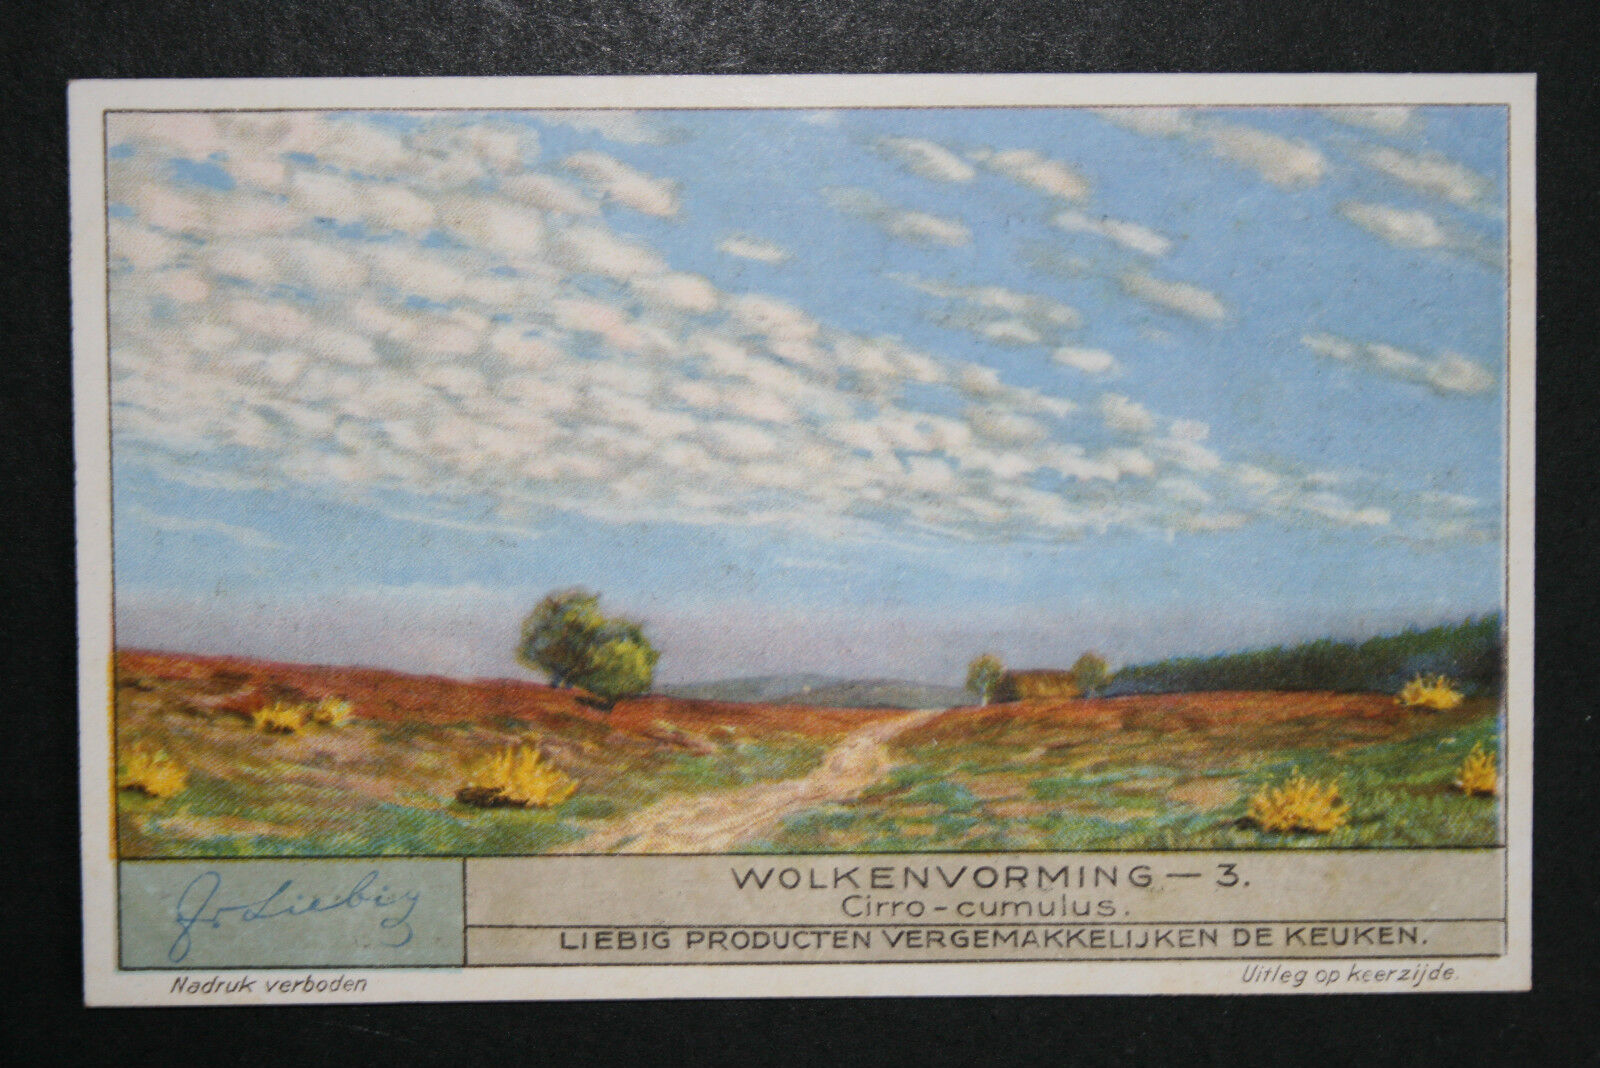 CIRRO-CUMULUS  Cloud Formation   Vintage Illustrated Card  WC26